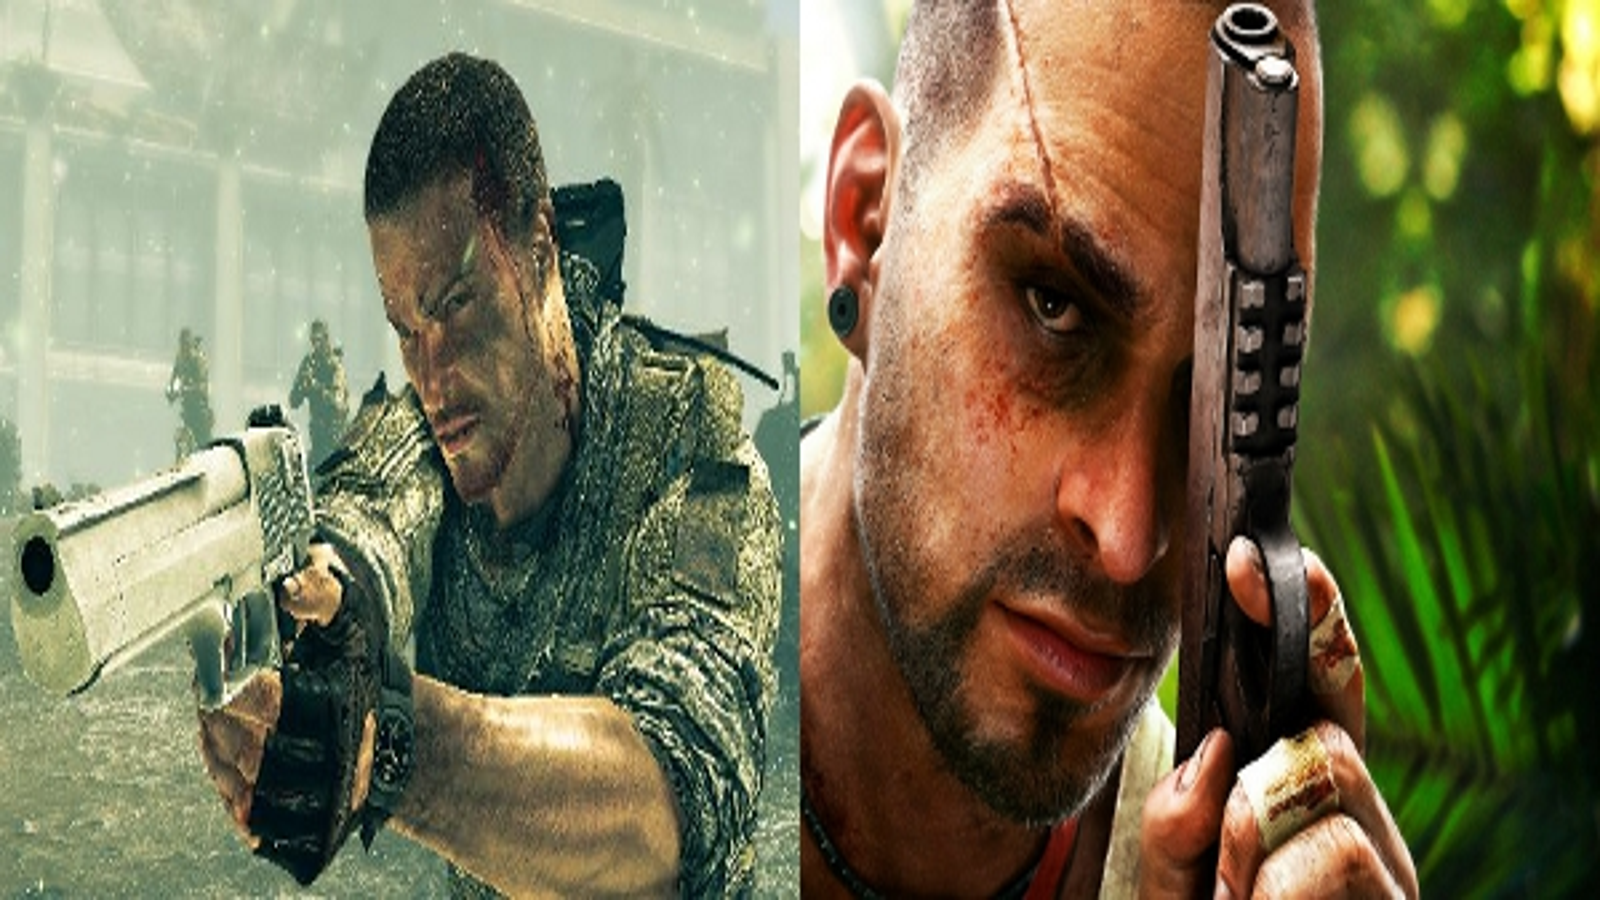 Addicted in Games: Spec Ops: The Line - PC, PS3, Xbox 360 - 2012